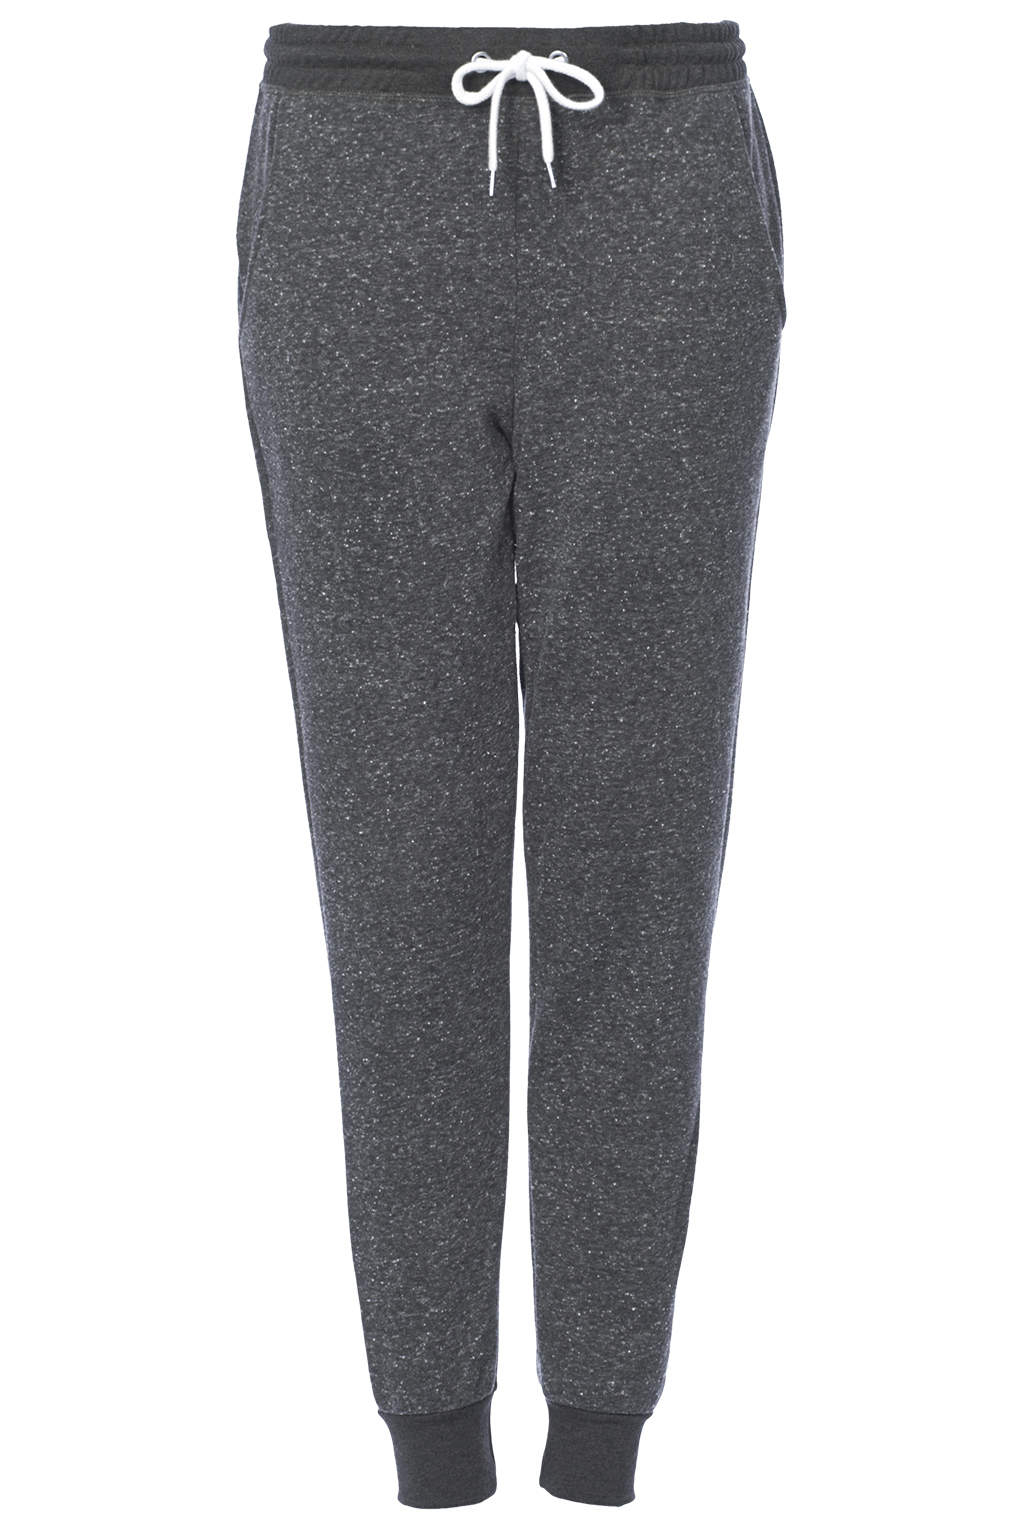 Topshop Neppy Joggers in Gray (CHARCOAL) | Lyst